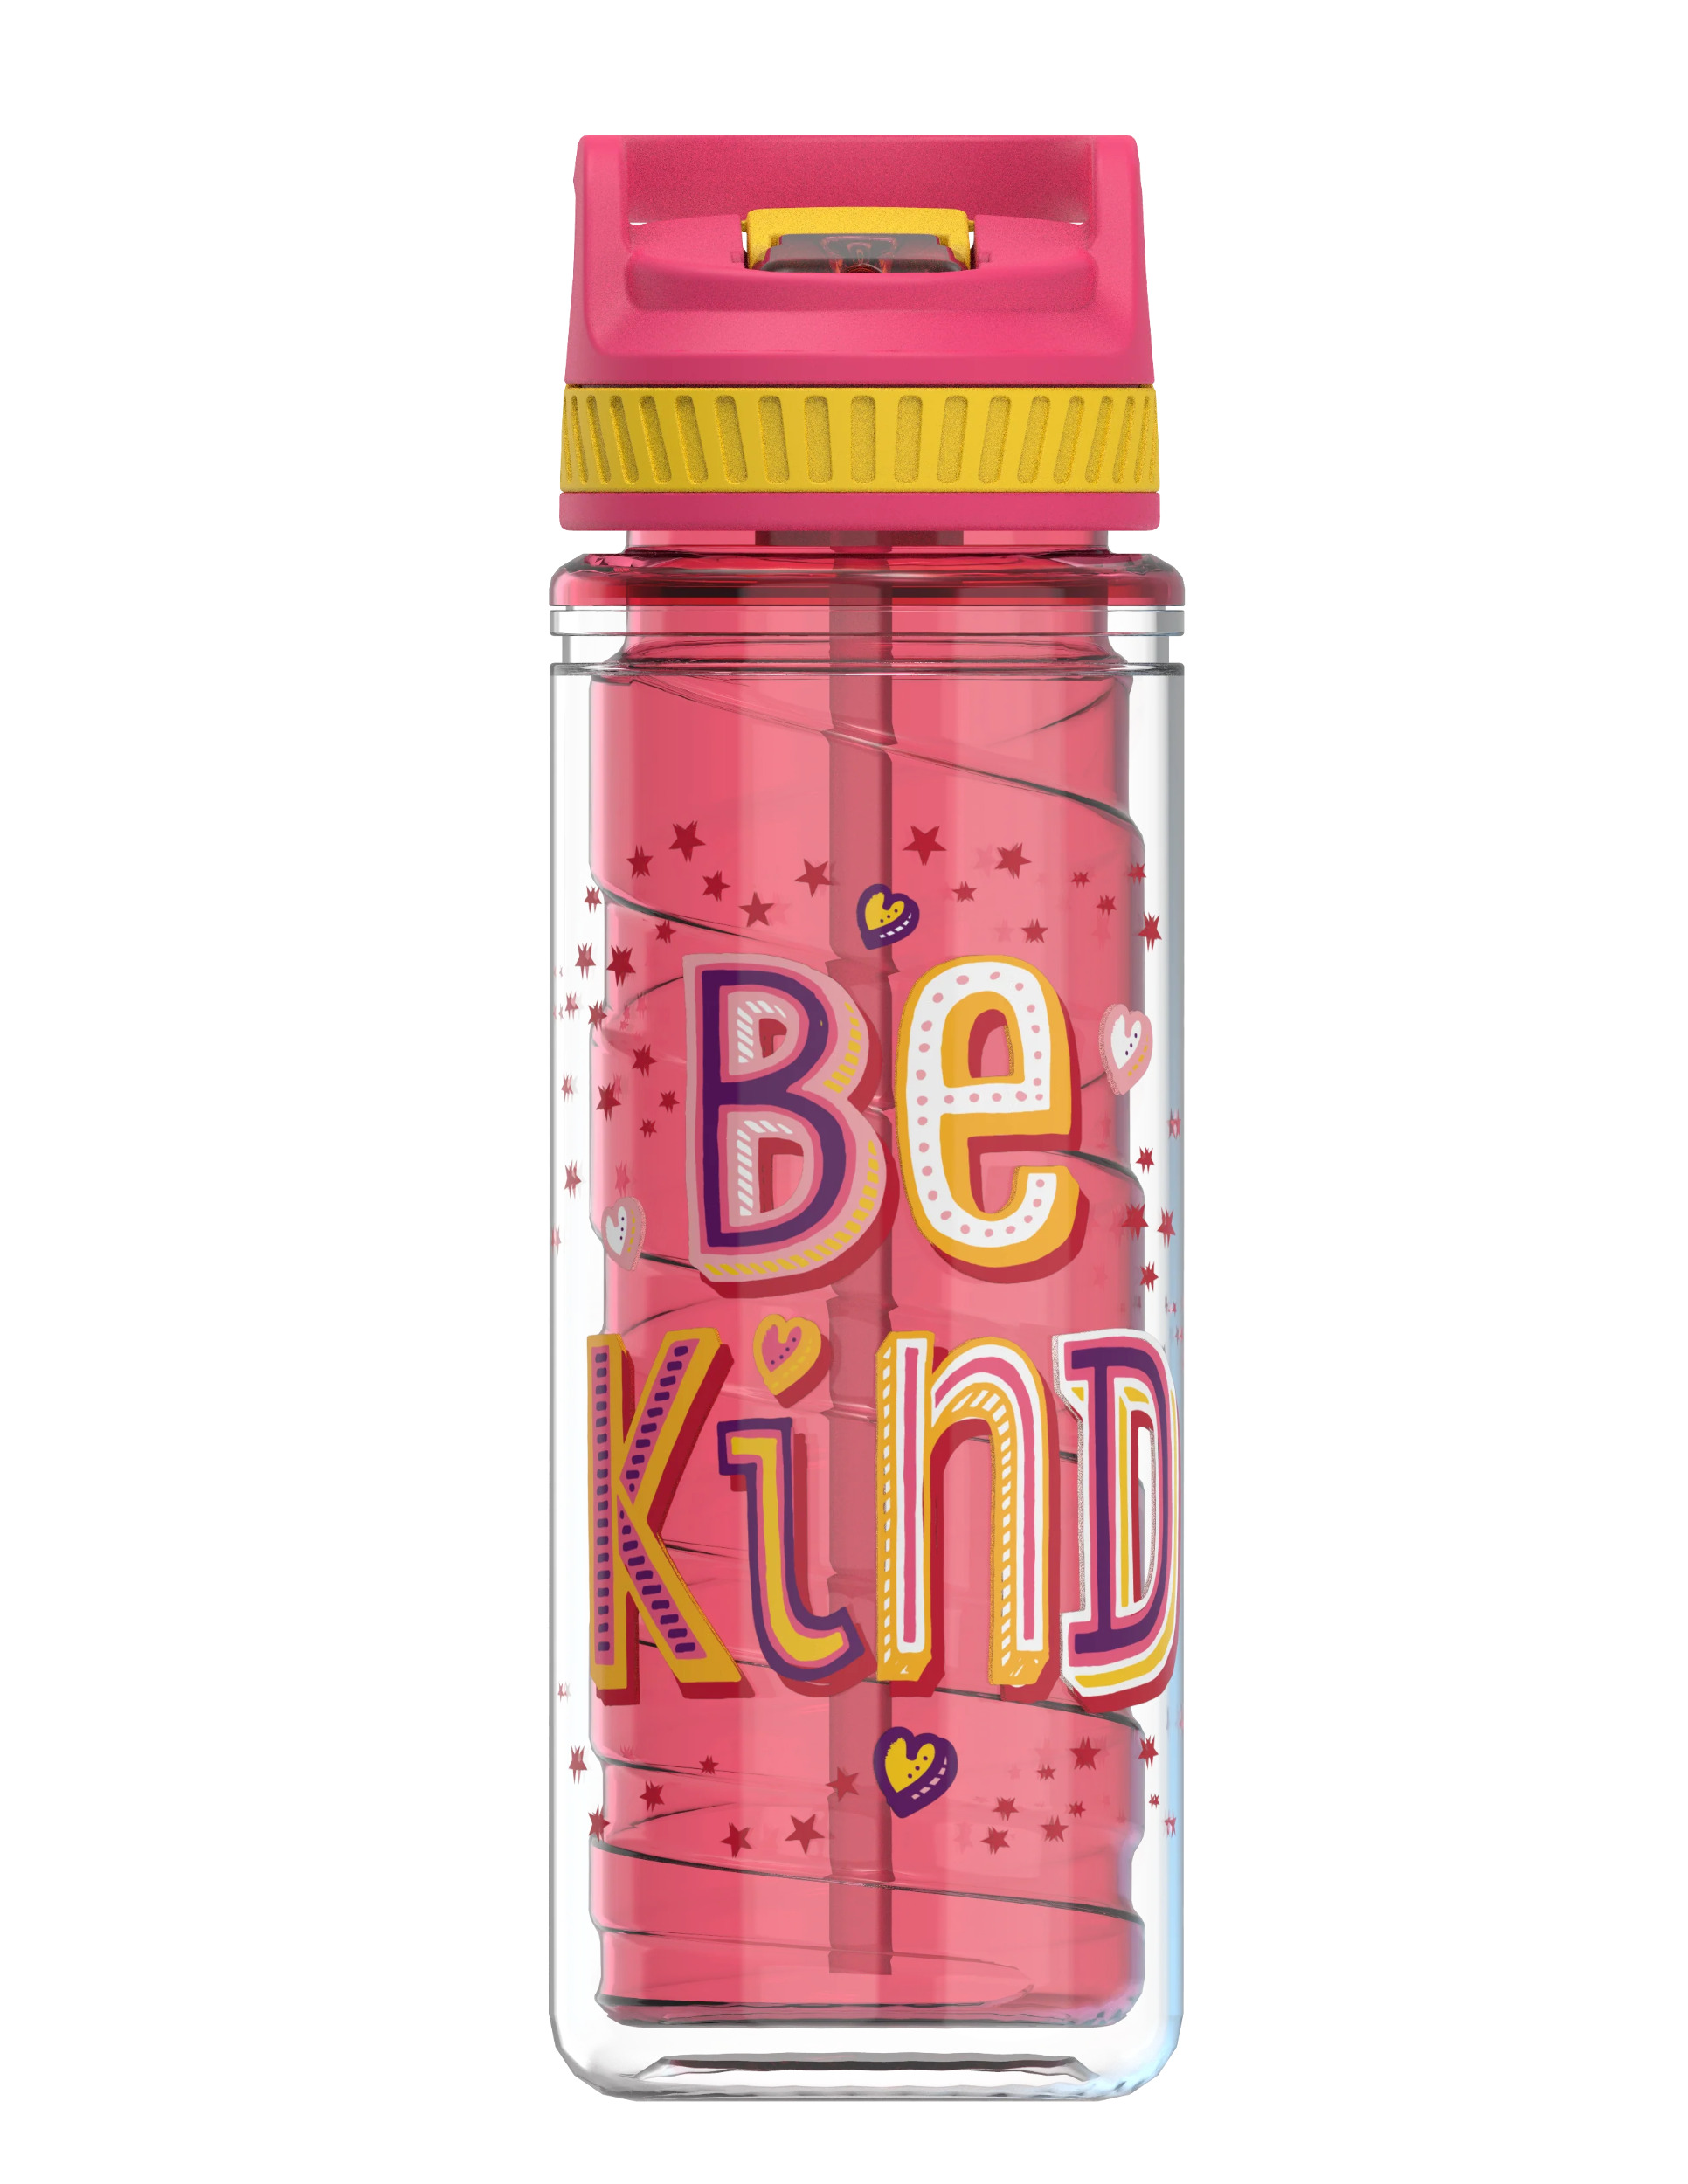 Cool Gear 2-Pack 16 oz Kid's Twist Water Bottle with Double Wall, Sipper Lid and Finger Loop Cap with Printed Design | Great for School, Sports, Outdoors, and More - Be Kind/ Flowers - image 2 of 3